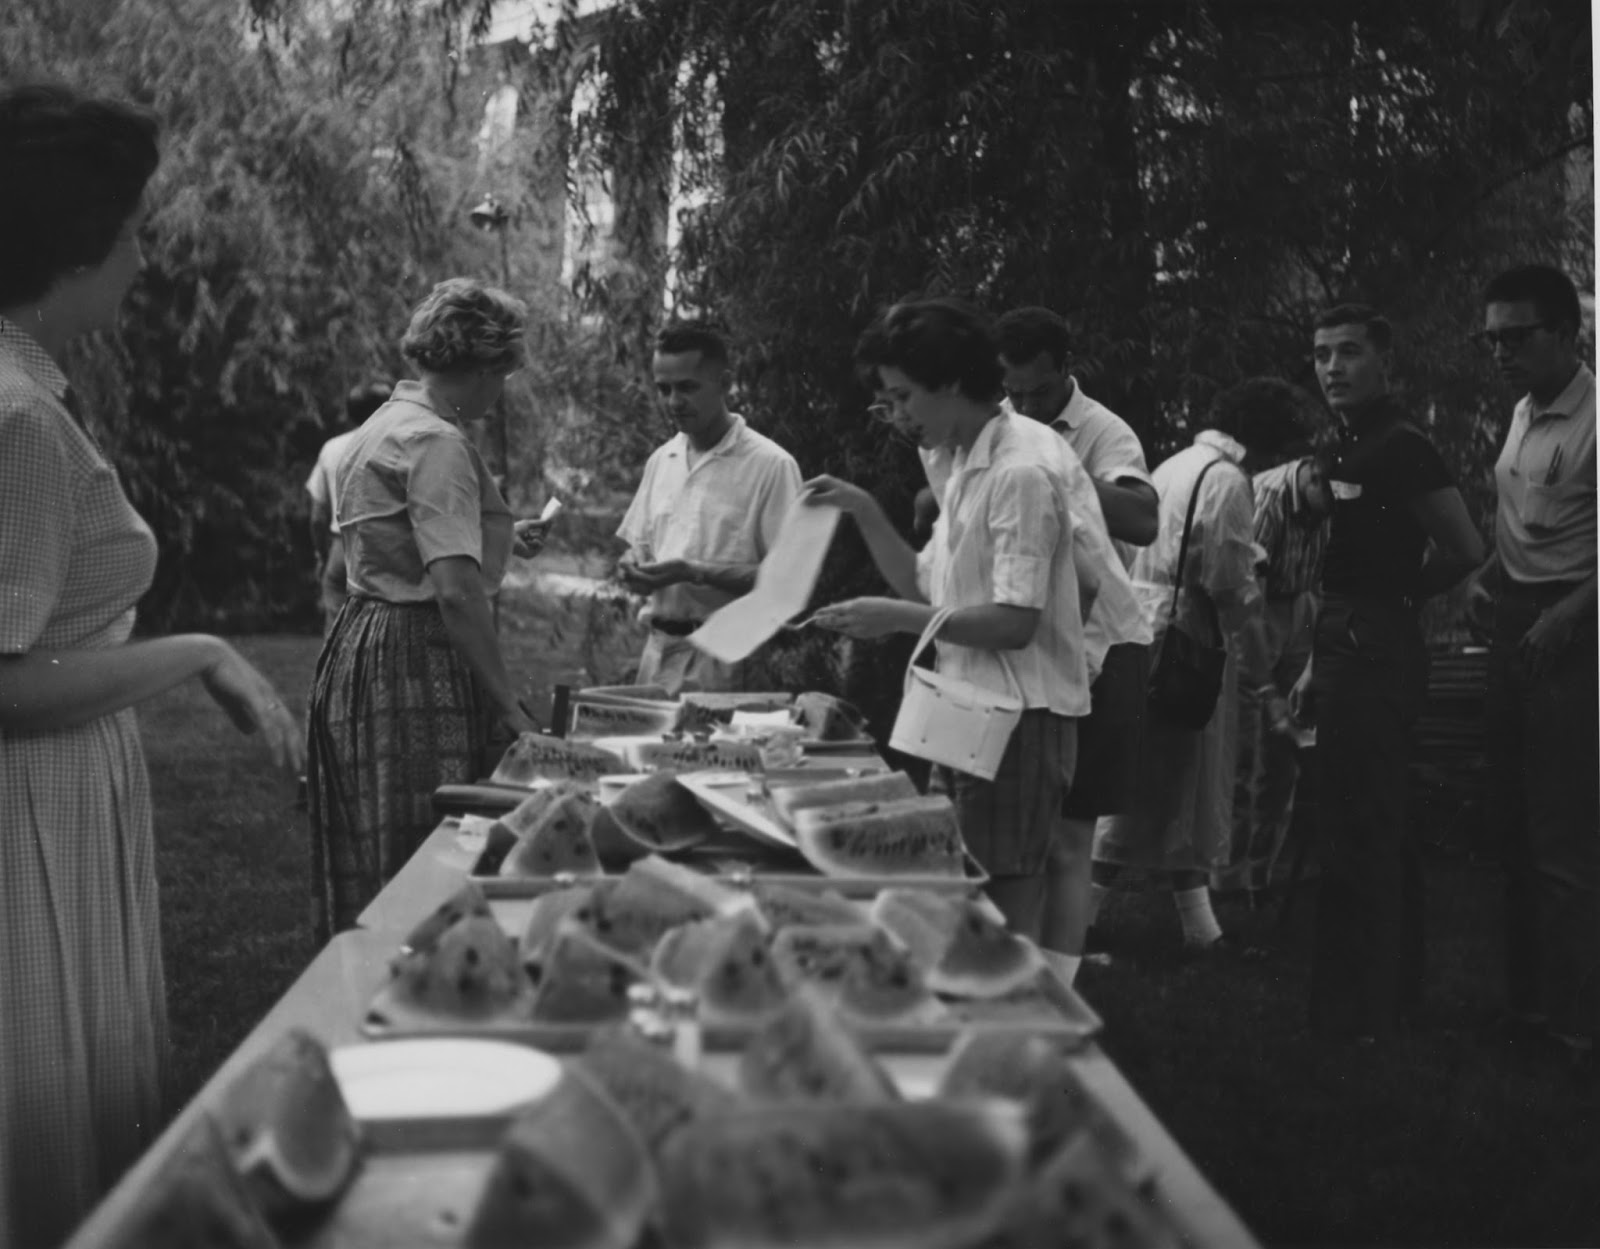 In addition to classes, students participating in UK Summer School often take part in fun campus events like this watermelon feast in 1956. Photo courtesy of UK Special Collections.